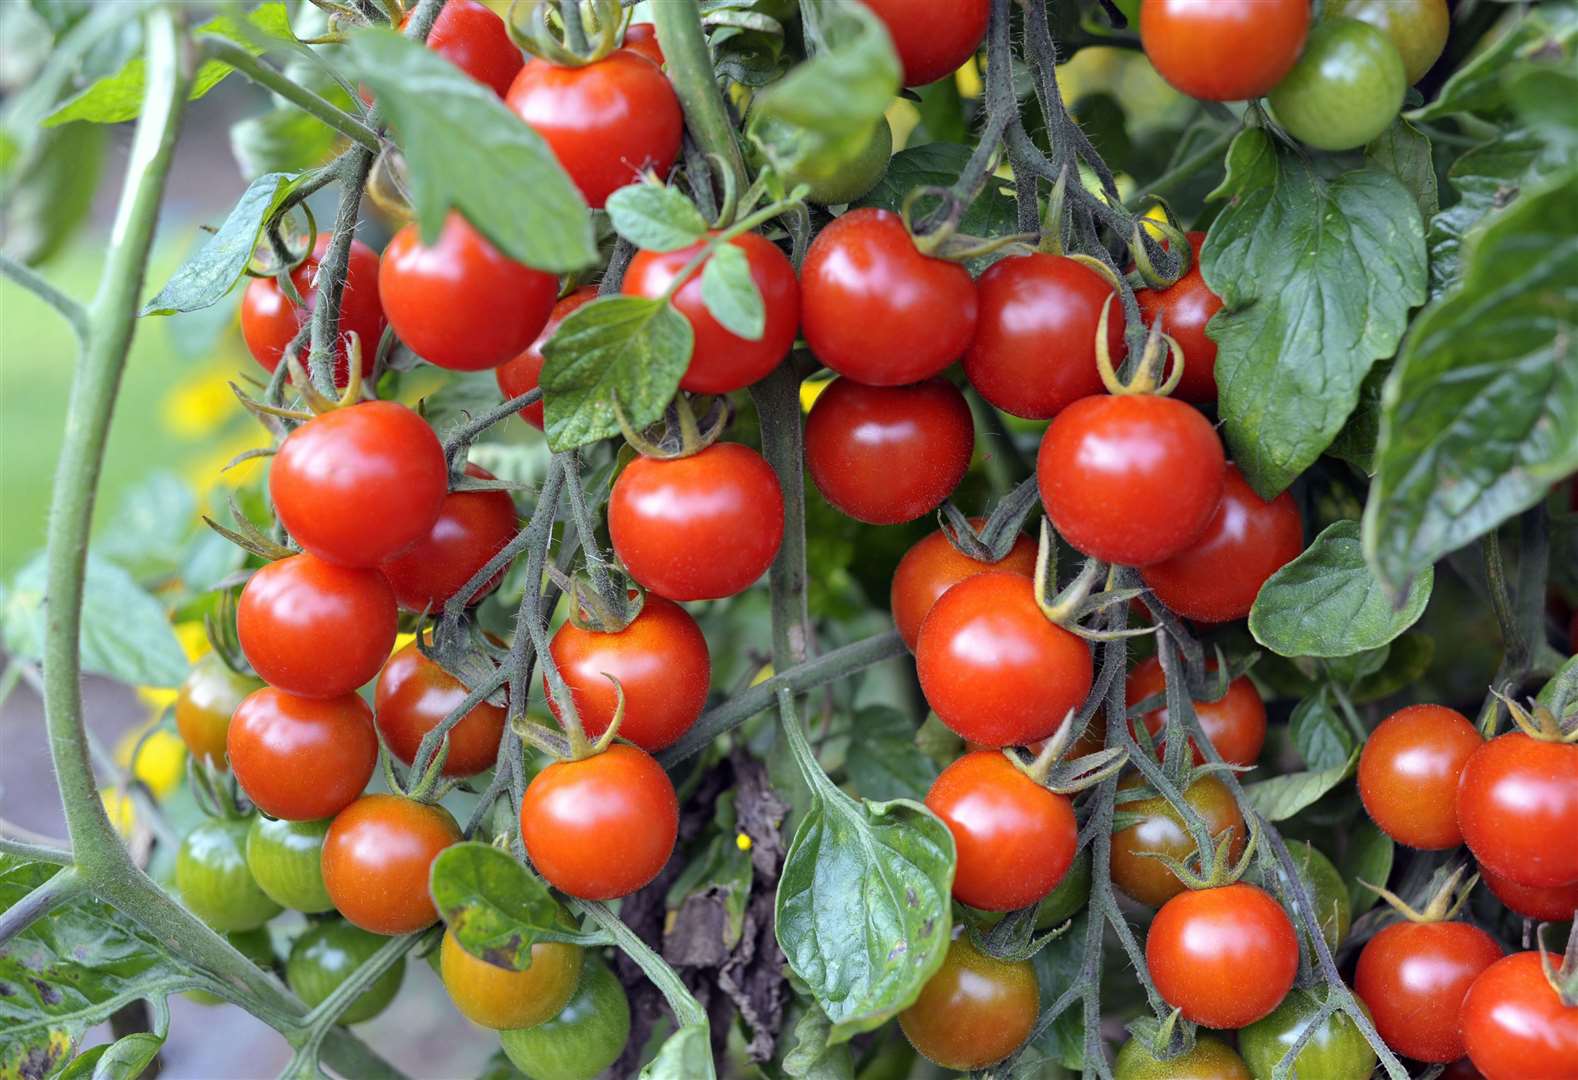 Growing tomatoes and other fresh food closer to home is just one thing that can help our world.